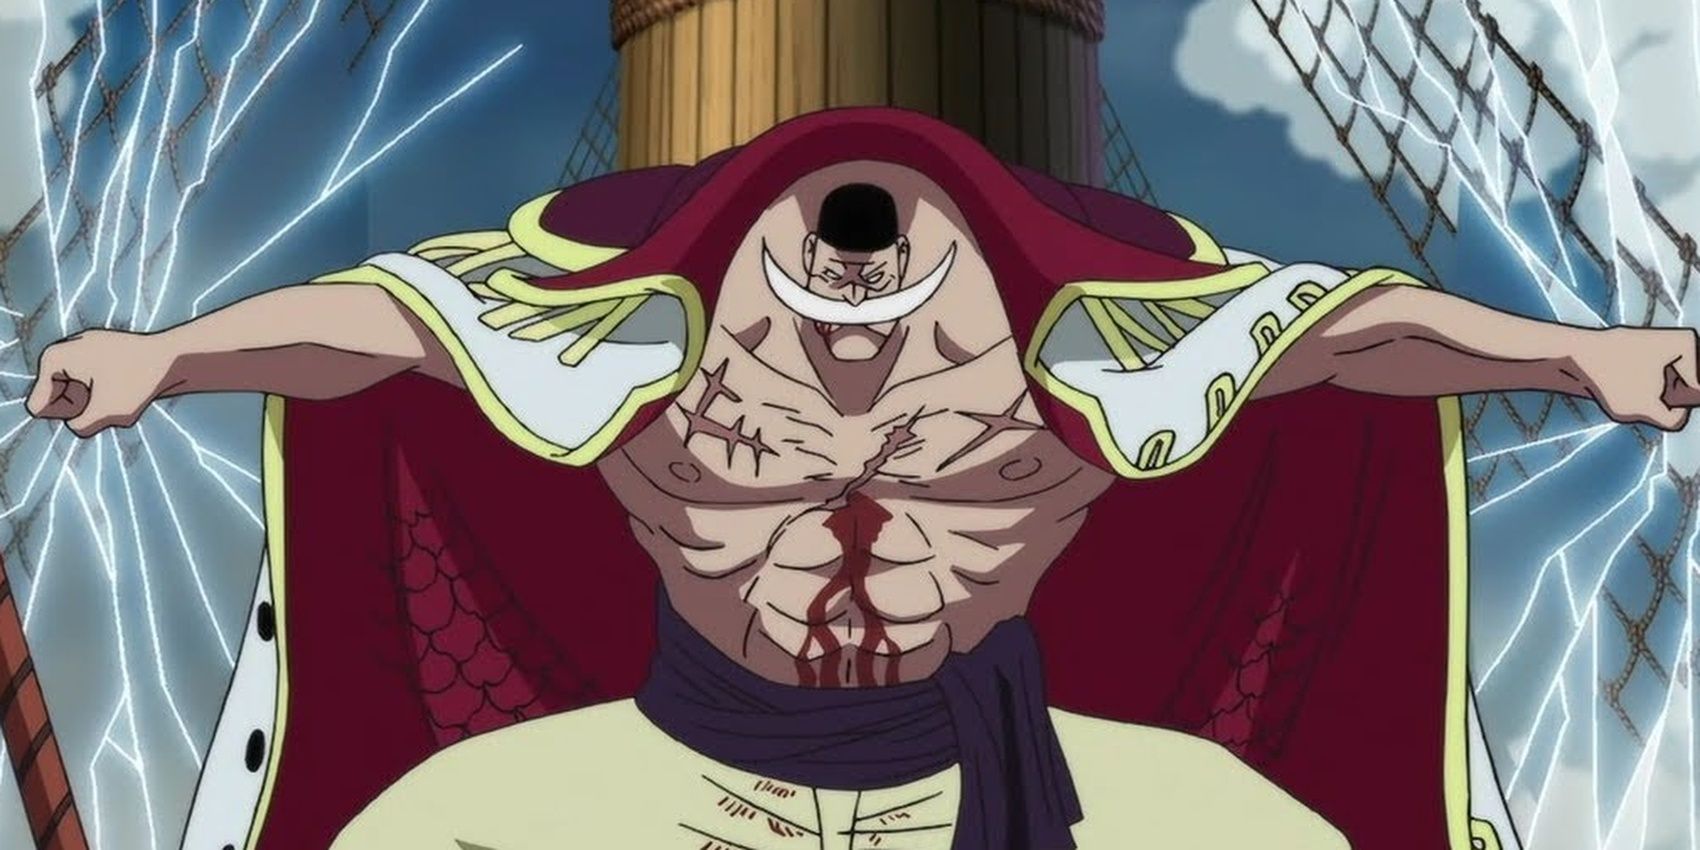 Evile Whitebeard extending his arms to put out lightning